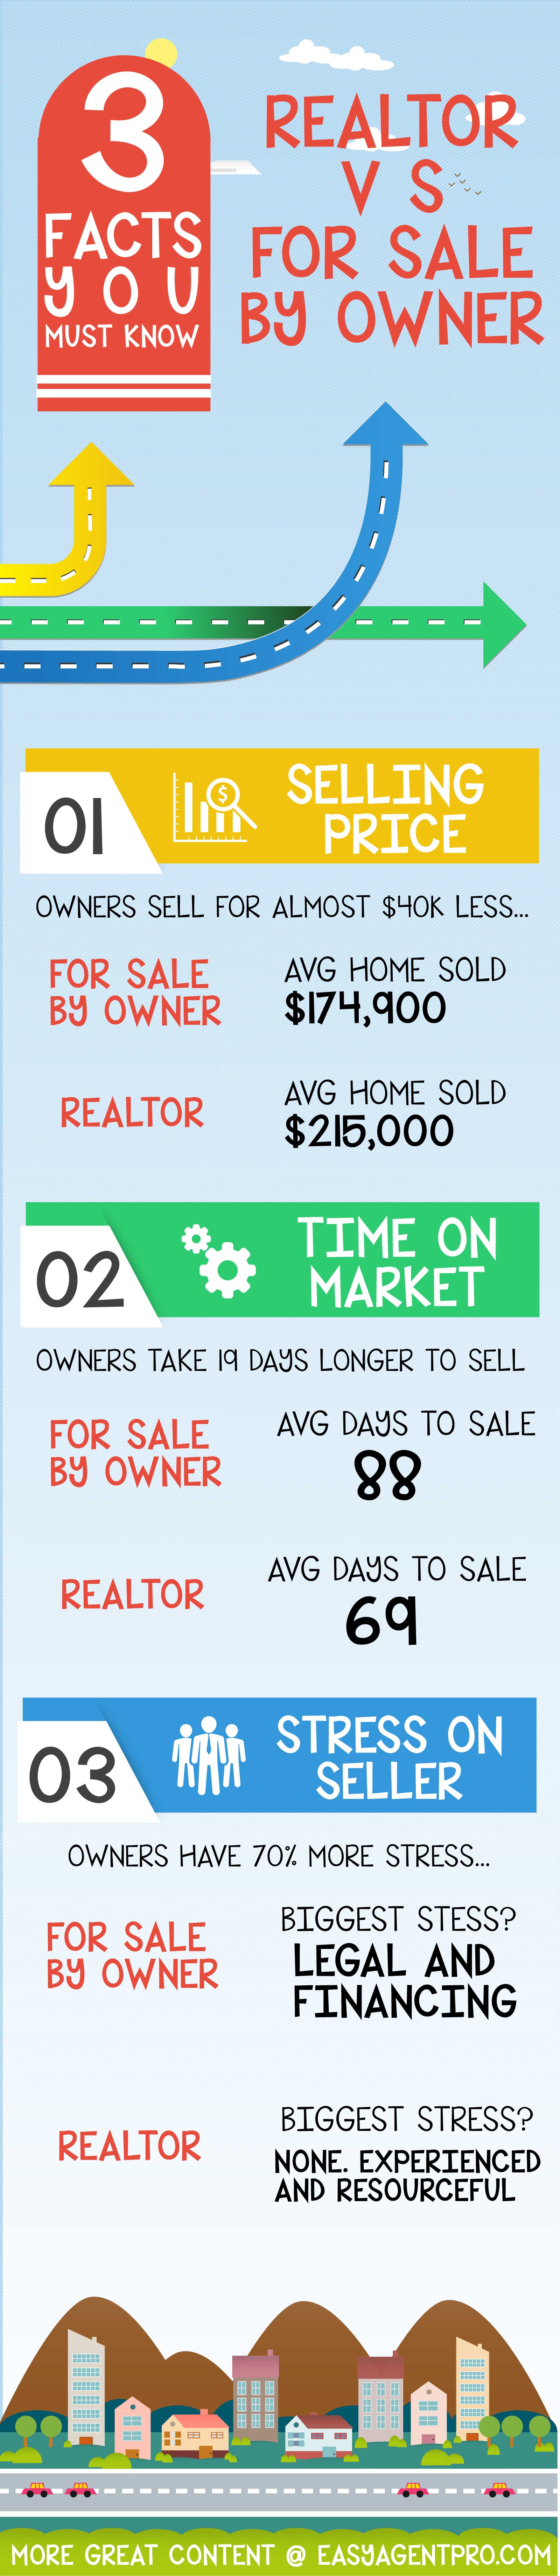 facts about fsbo 3 facts you must know as a realtor infographic